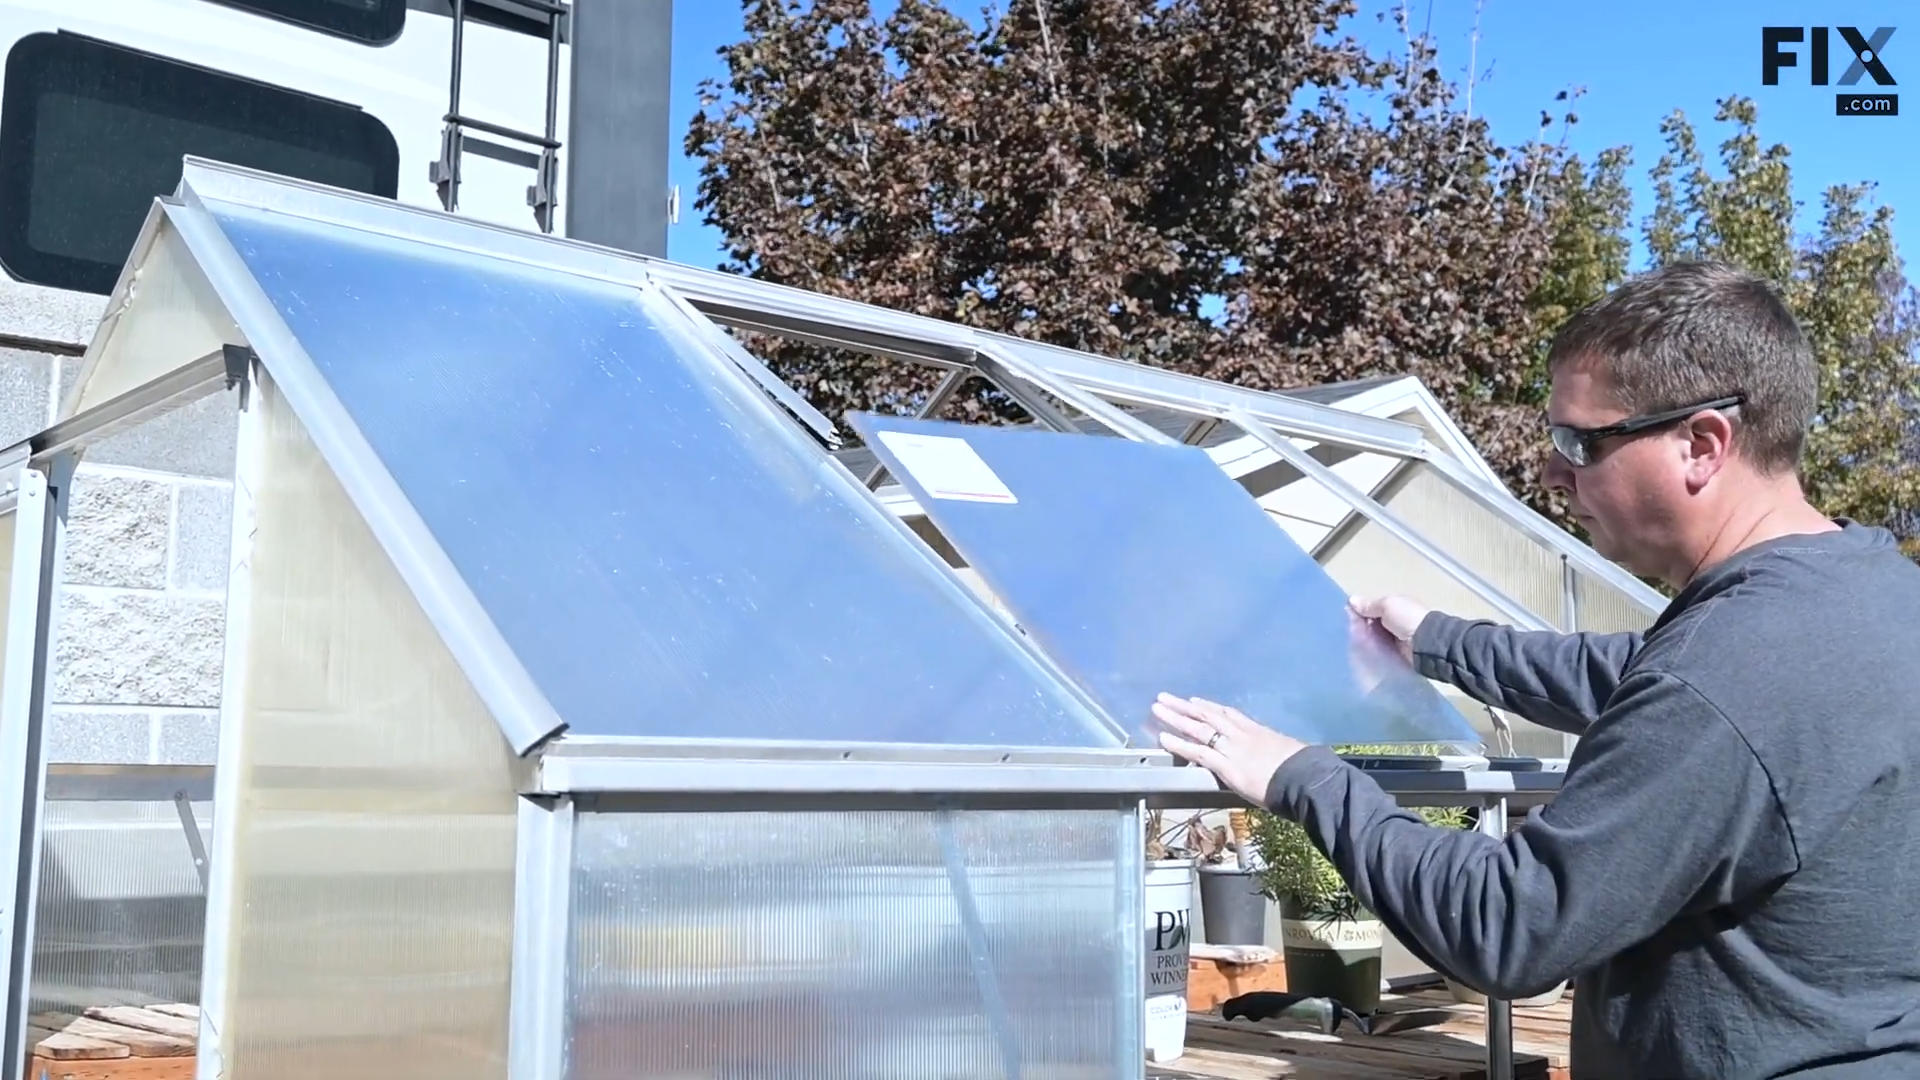 Expert technician installing the lower panel of a greenhouse vent